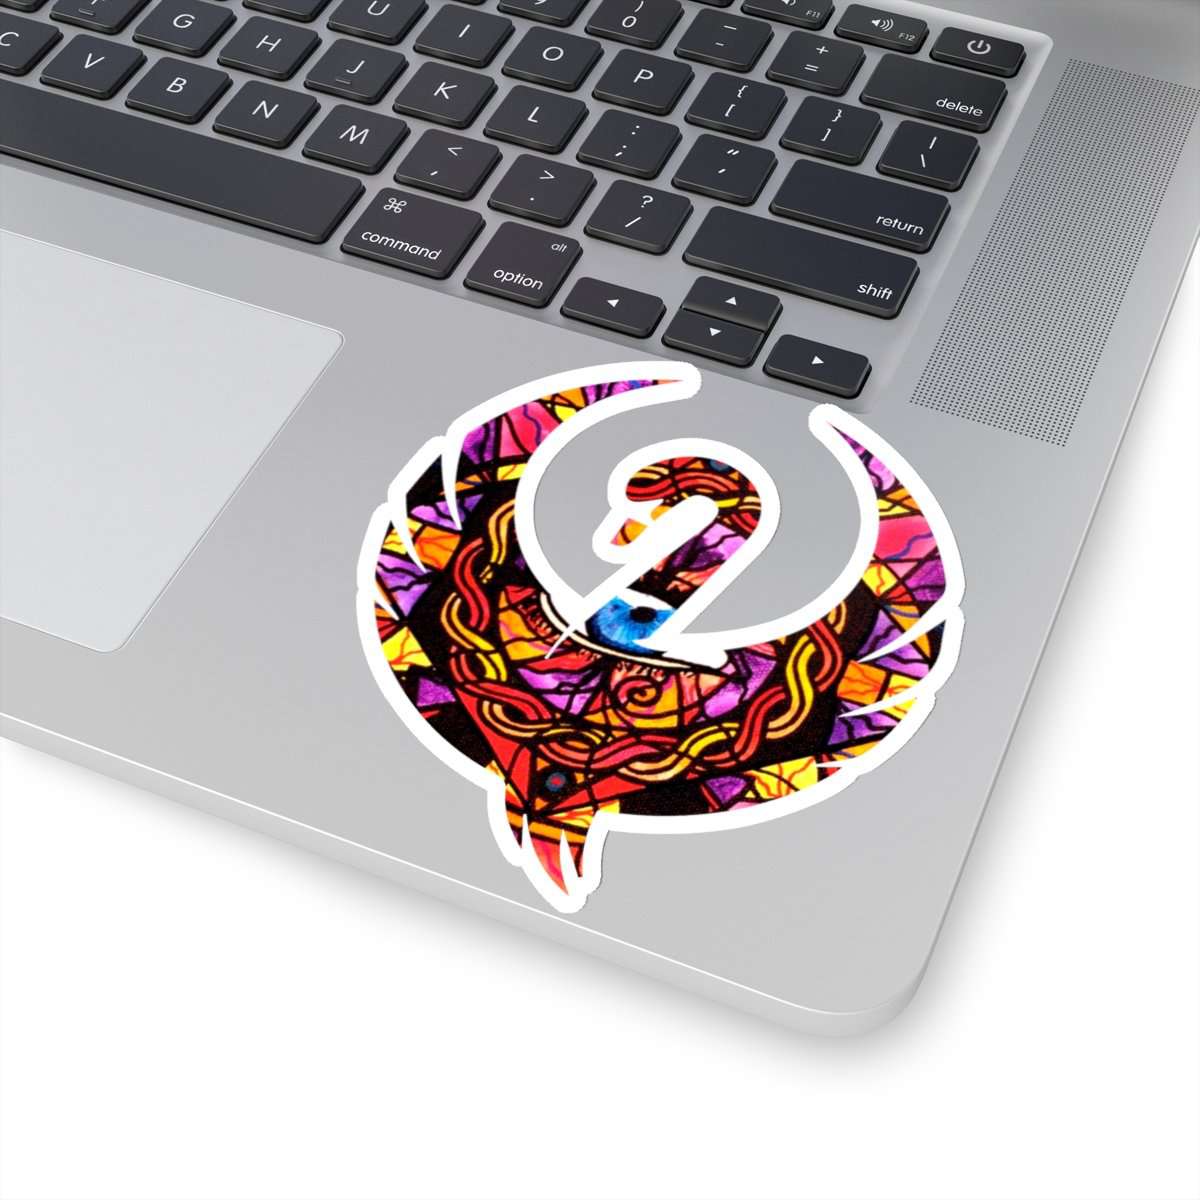 purchase-confident-self-expression-swan-stickers-hot-on-sale_11.jpg